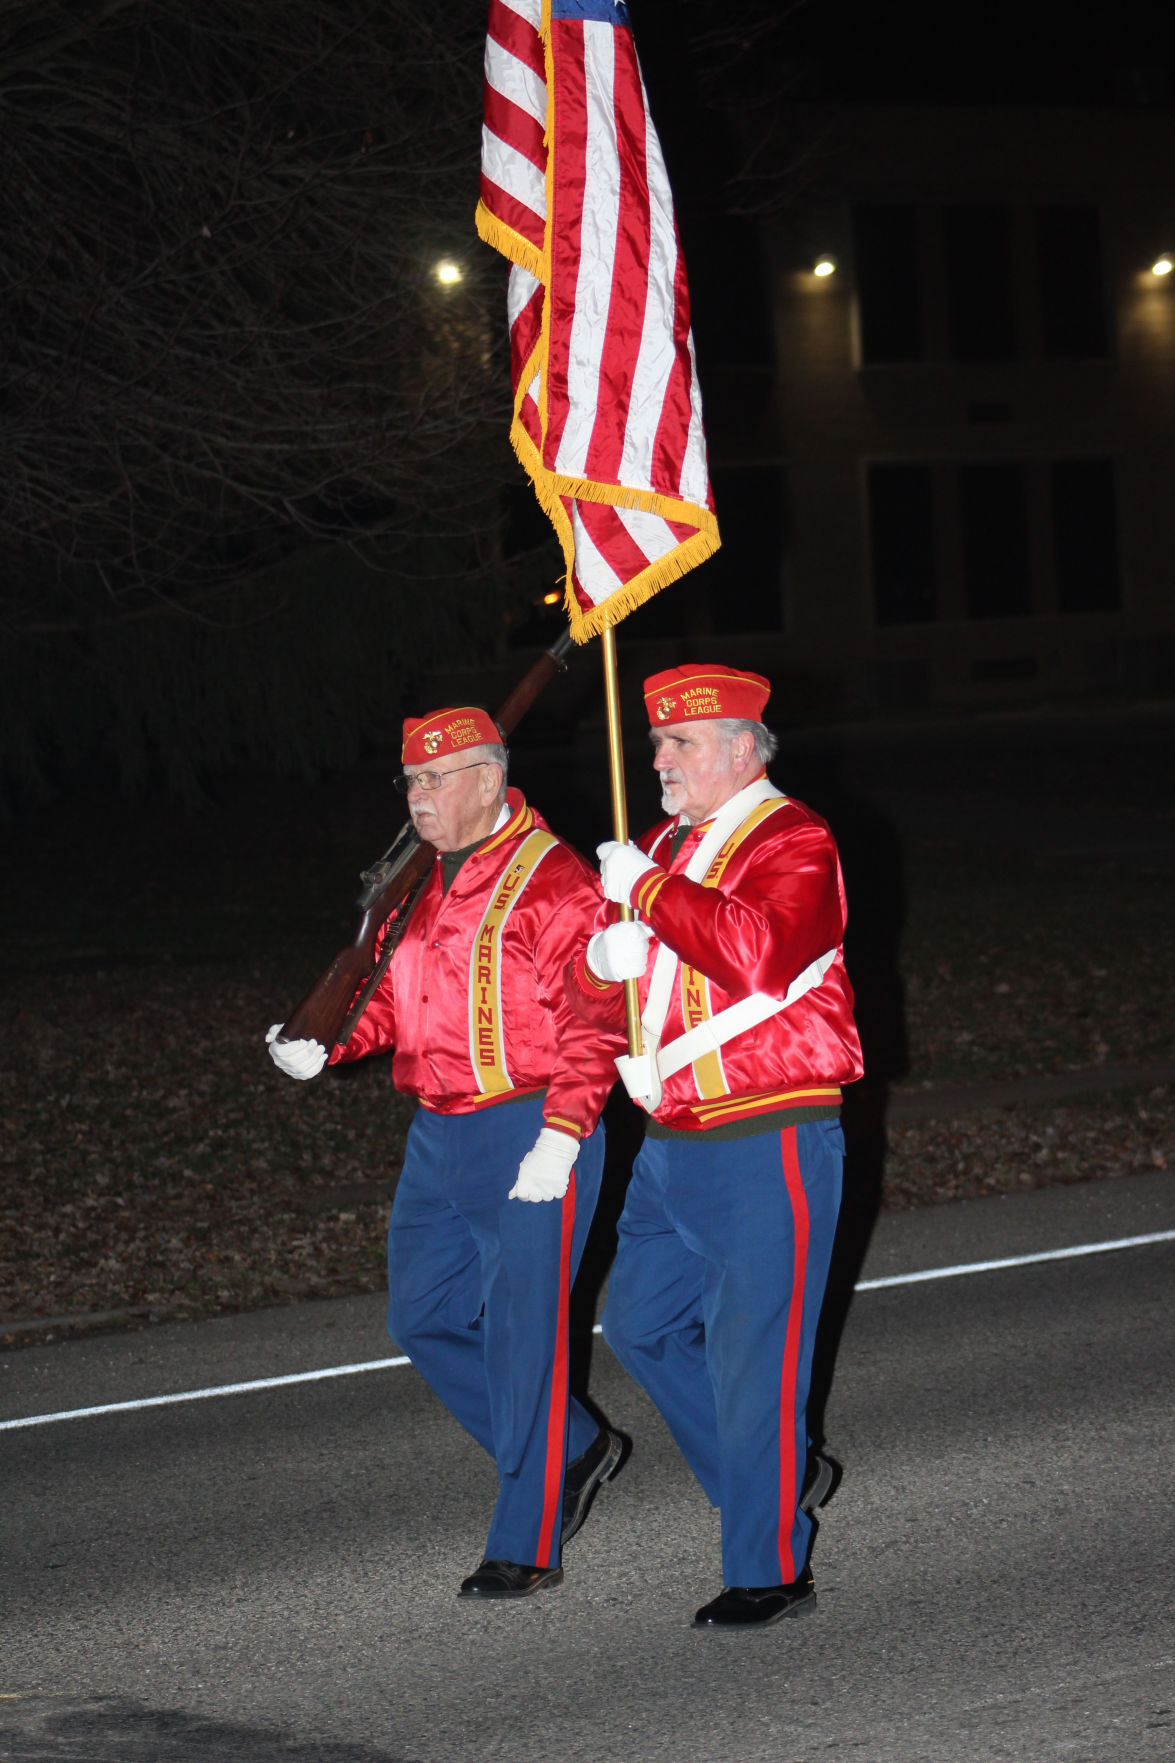 Rossville Parade Pic 2.JPG